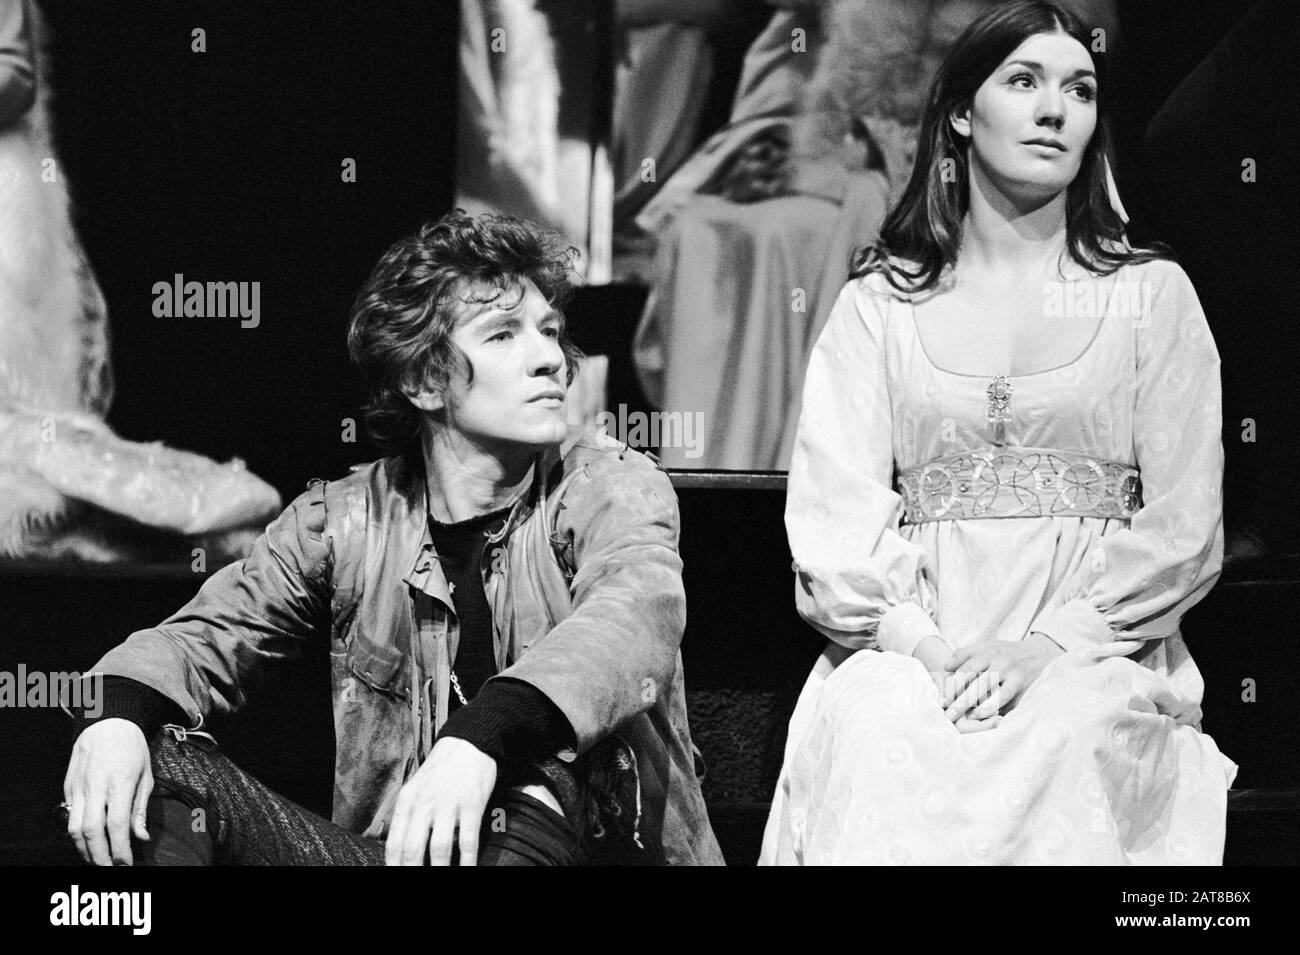 Ian McKellen (Hamlet), Susan Fleetwood (Ophelia) in HAMLET by Shakespeare directed by Robert Chetwyn for the Prospect Theatre Company in 1971. Sir Ian Murray McKellen, born 1939, Burnley, England. English stage and film actor. Co-founder of Stonewall, gay rights activist, knighted in 1990, made a Companion of Honour 2007. Susan Maureen Fleetwood, British stage, film, and television actress, born 21 September 1944 St Andrews, died 29 September 1995 Salisbury. Stock Photo